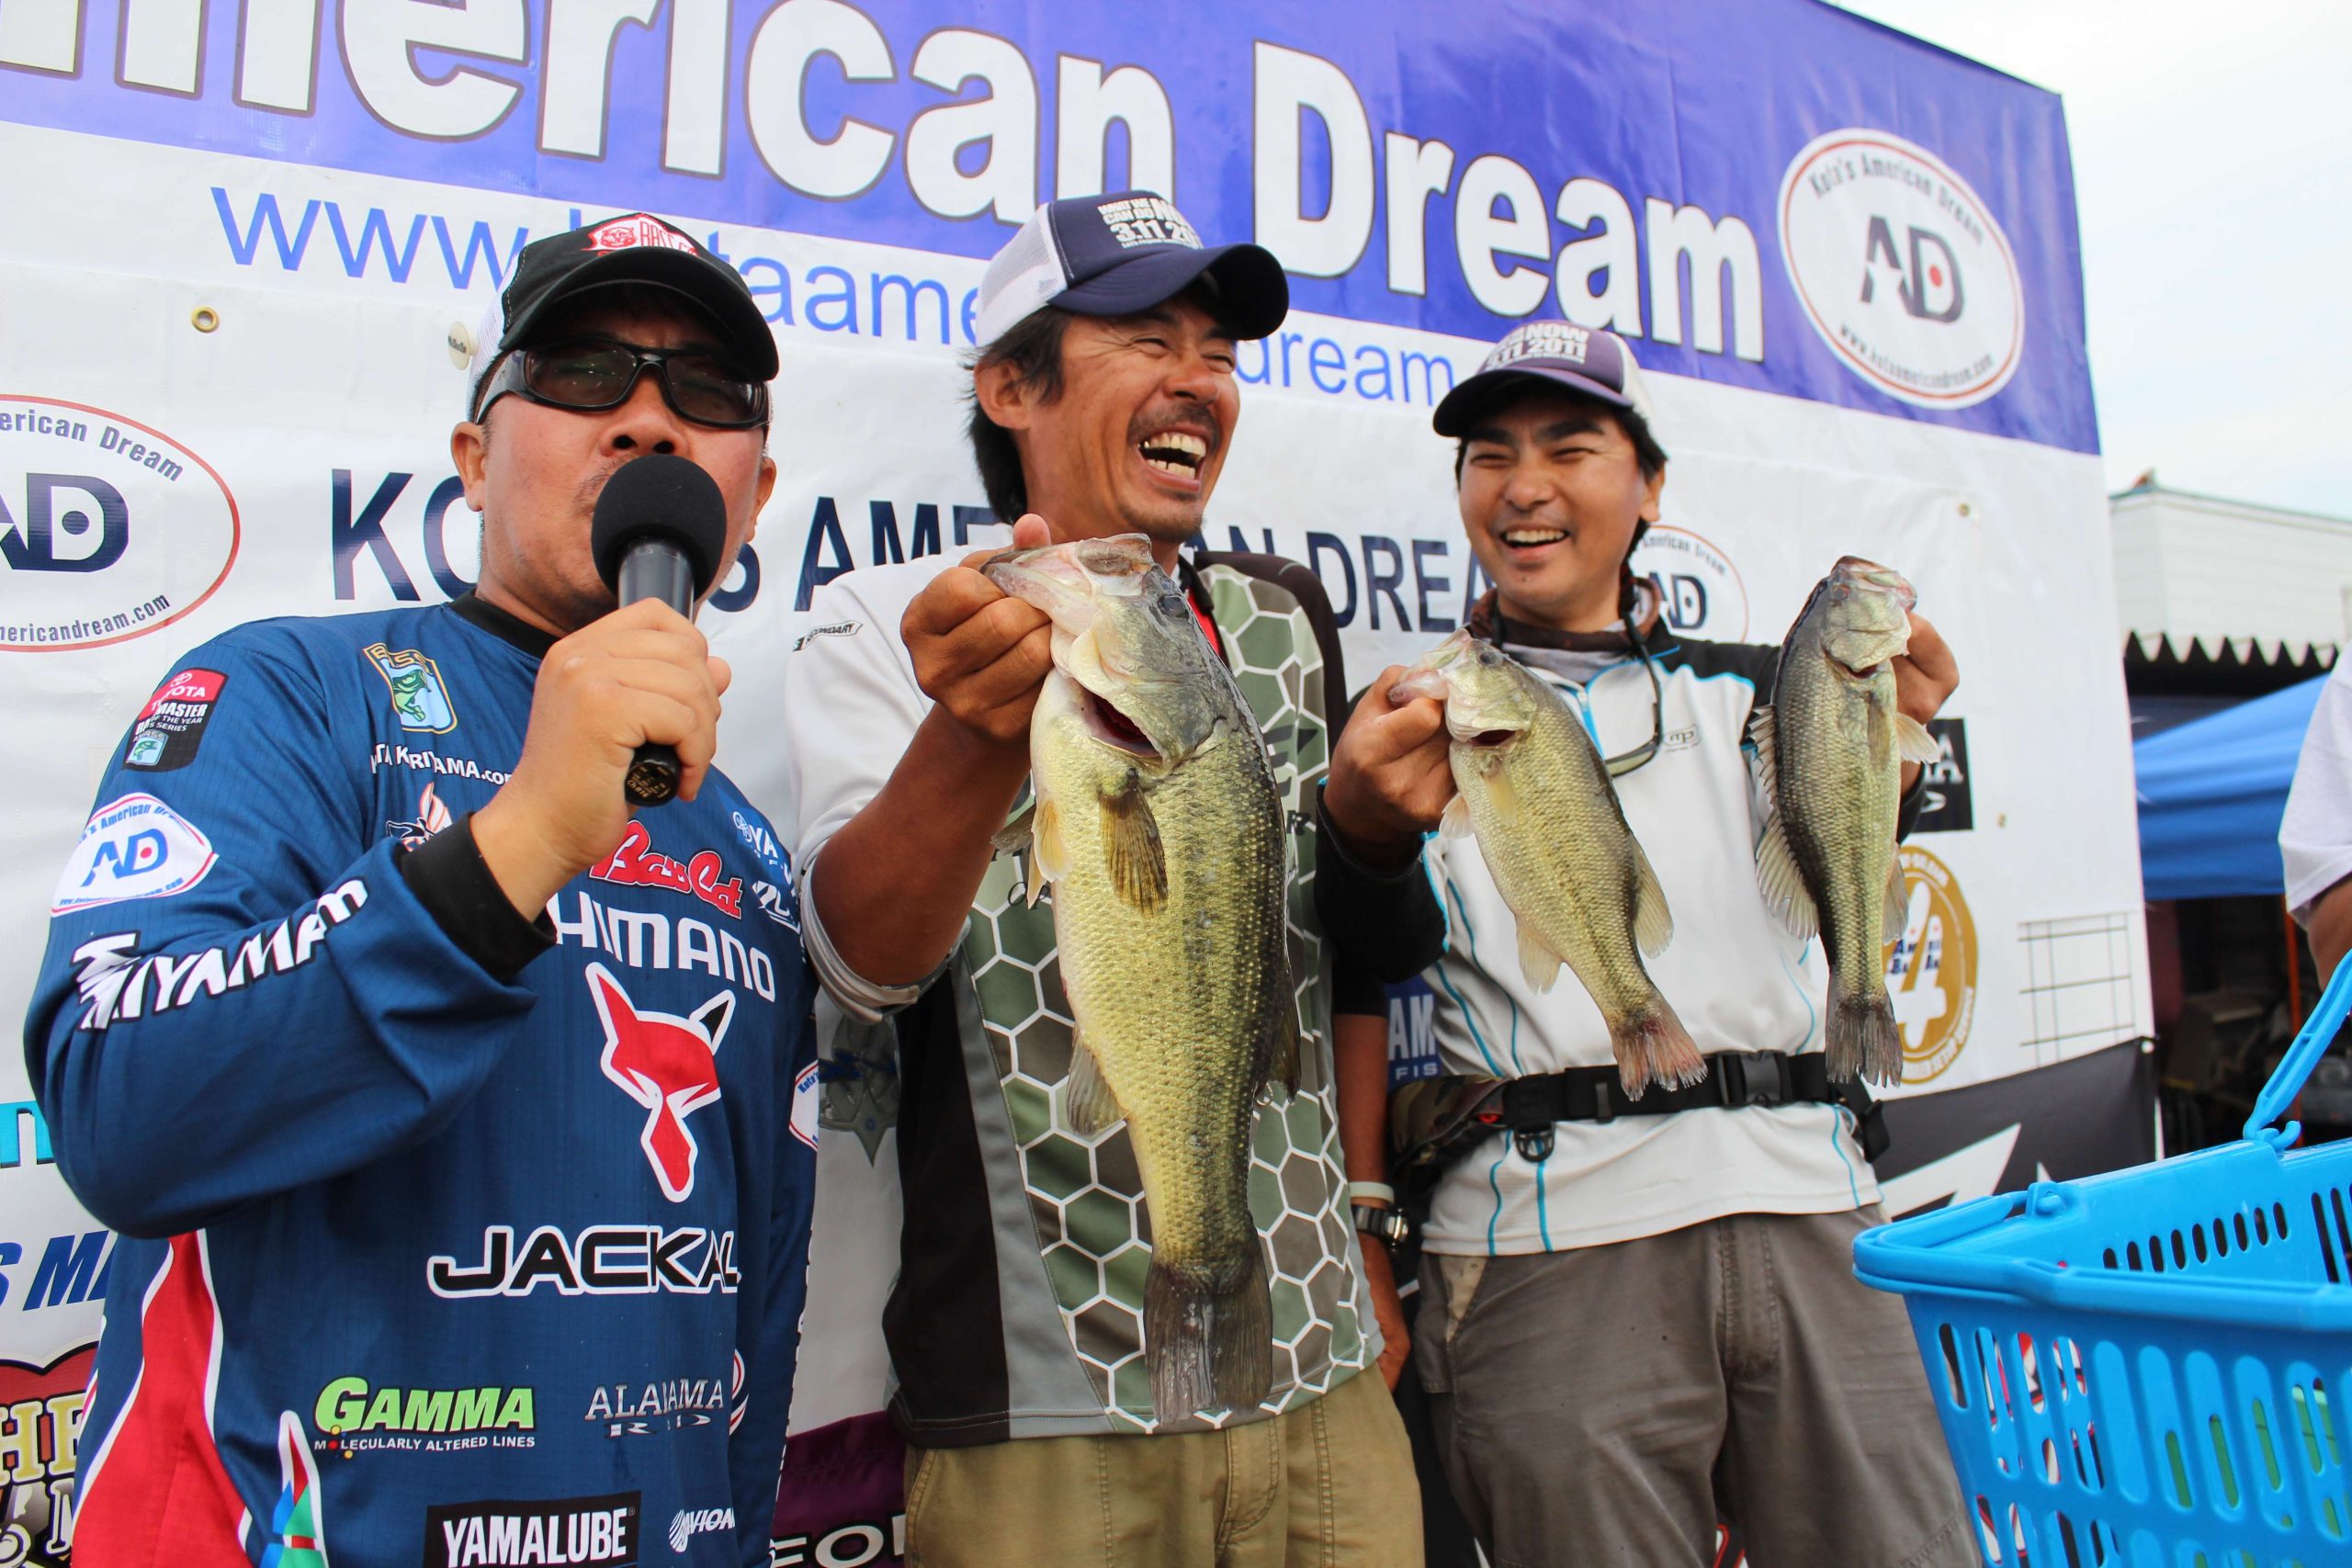 This team thought they were on their way to the airport to fish in Arkansas at the BassCat Invitational.